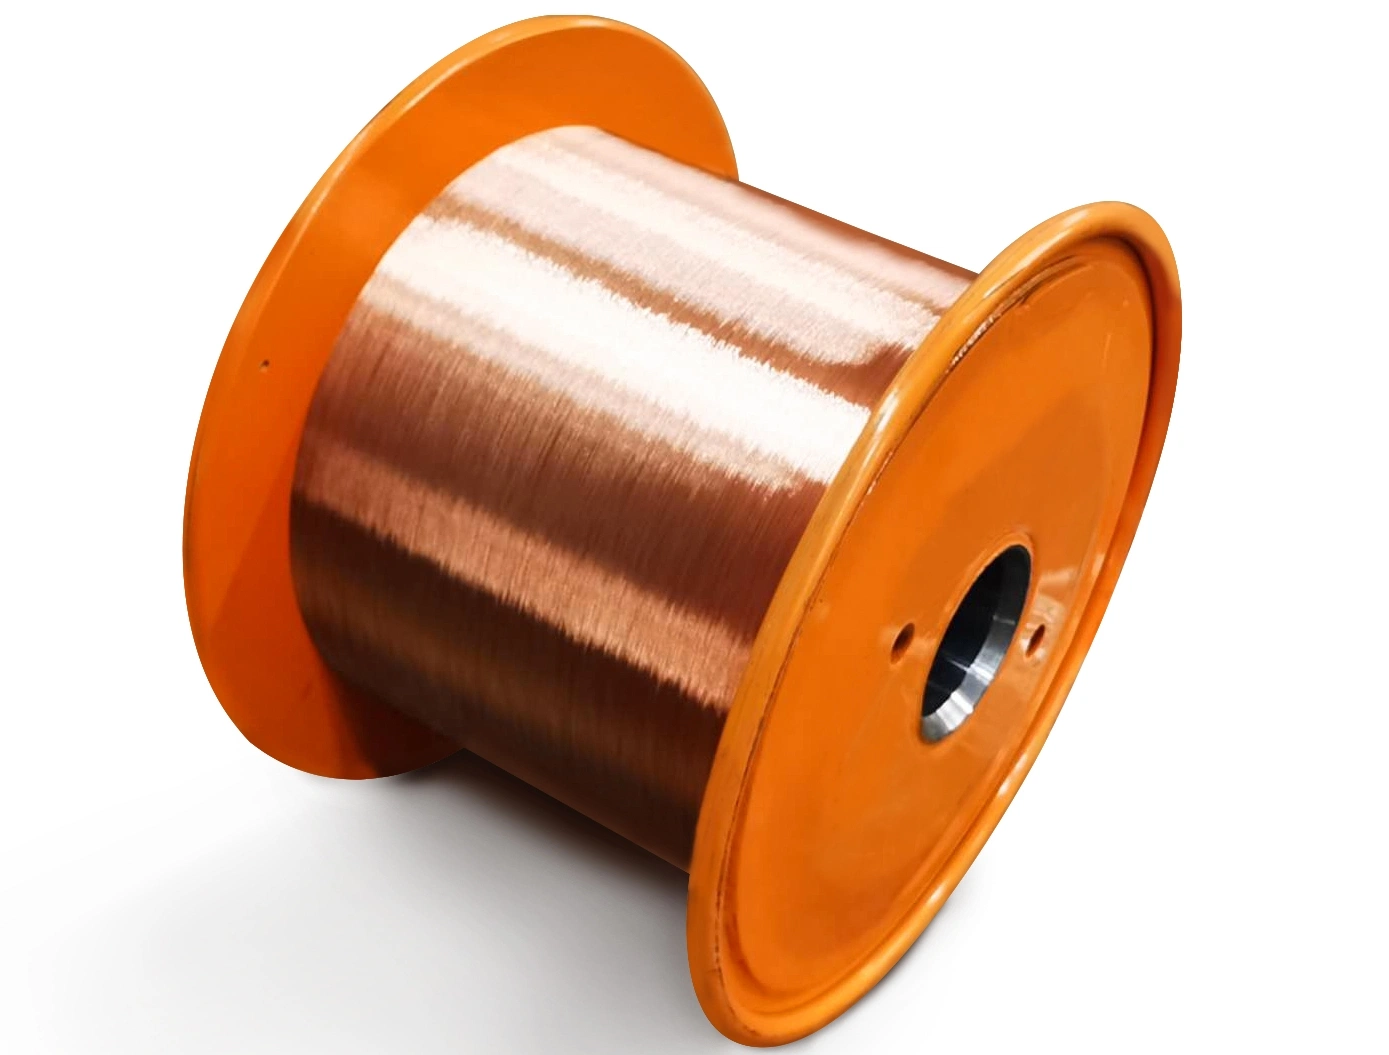 ASTM B Standard CCS Copper-Clad Steel Strand Wire for Power Transmission Line